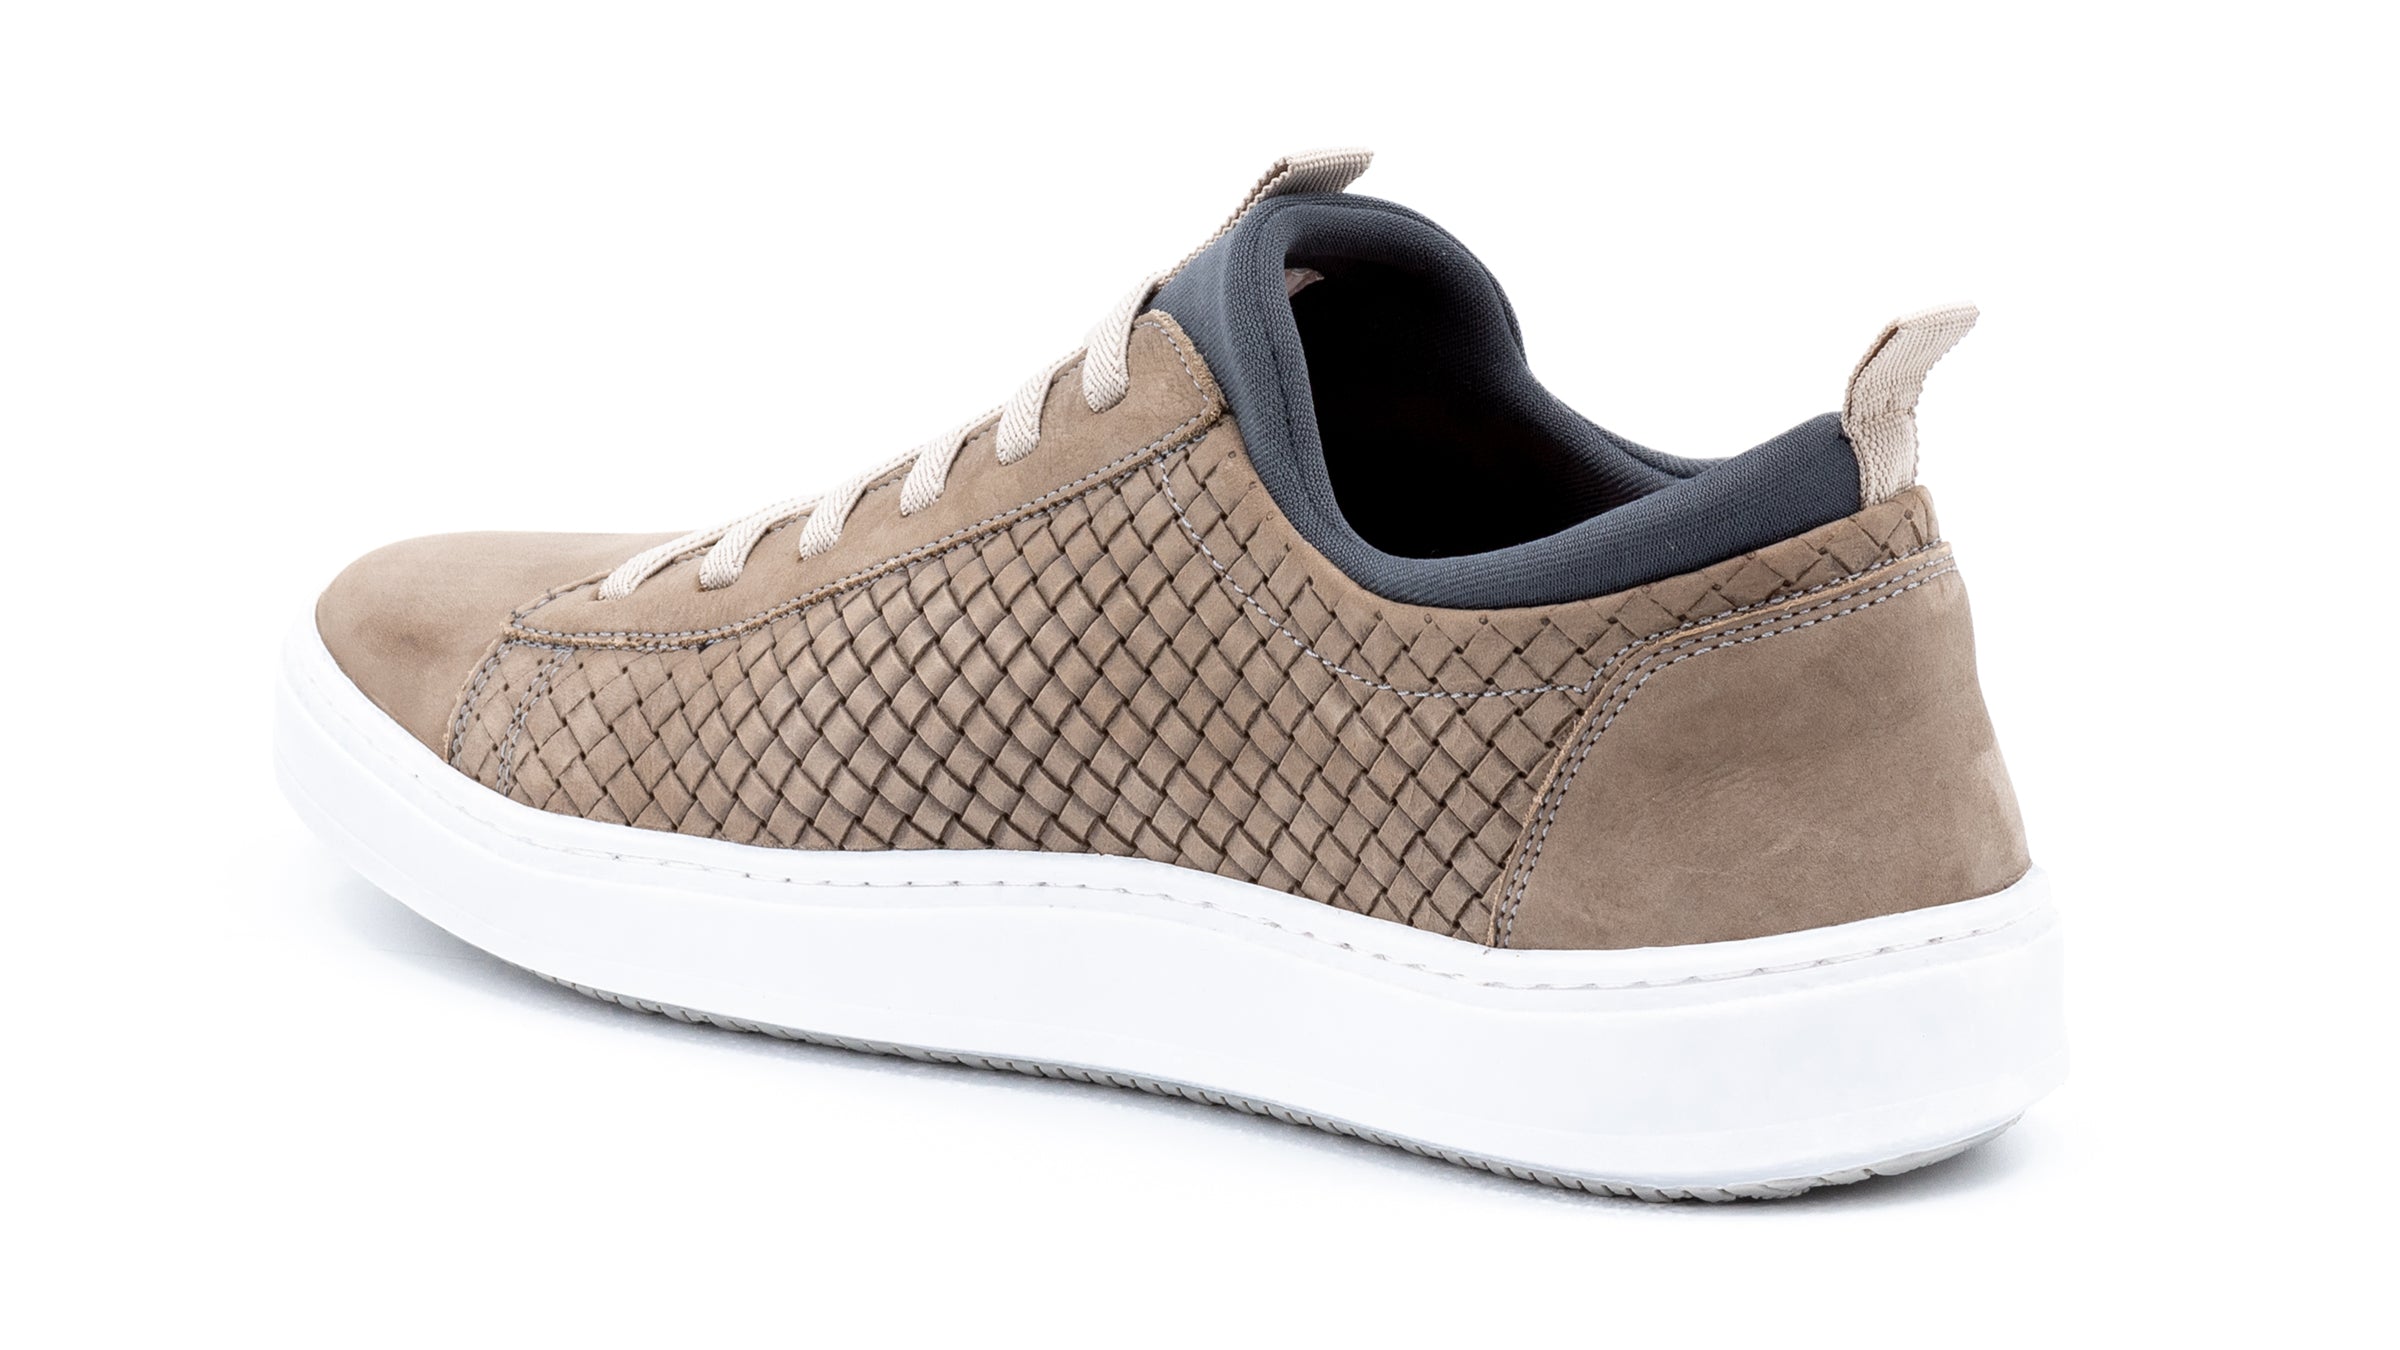 Cameron Water Repellent Suede Leather Sneakers - Stone | Martin Dingman